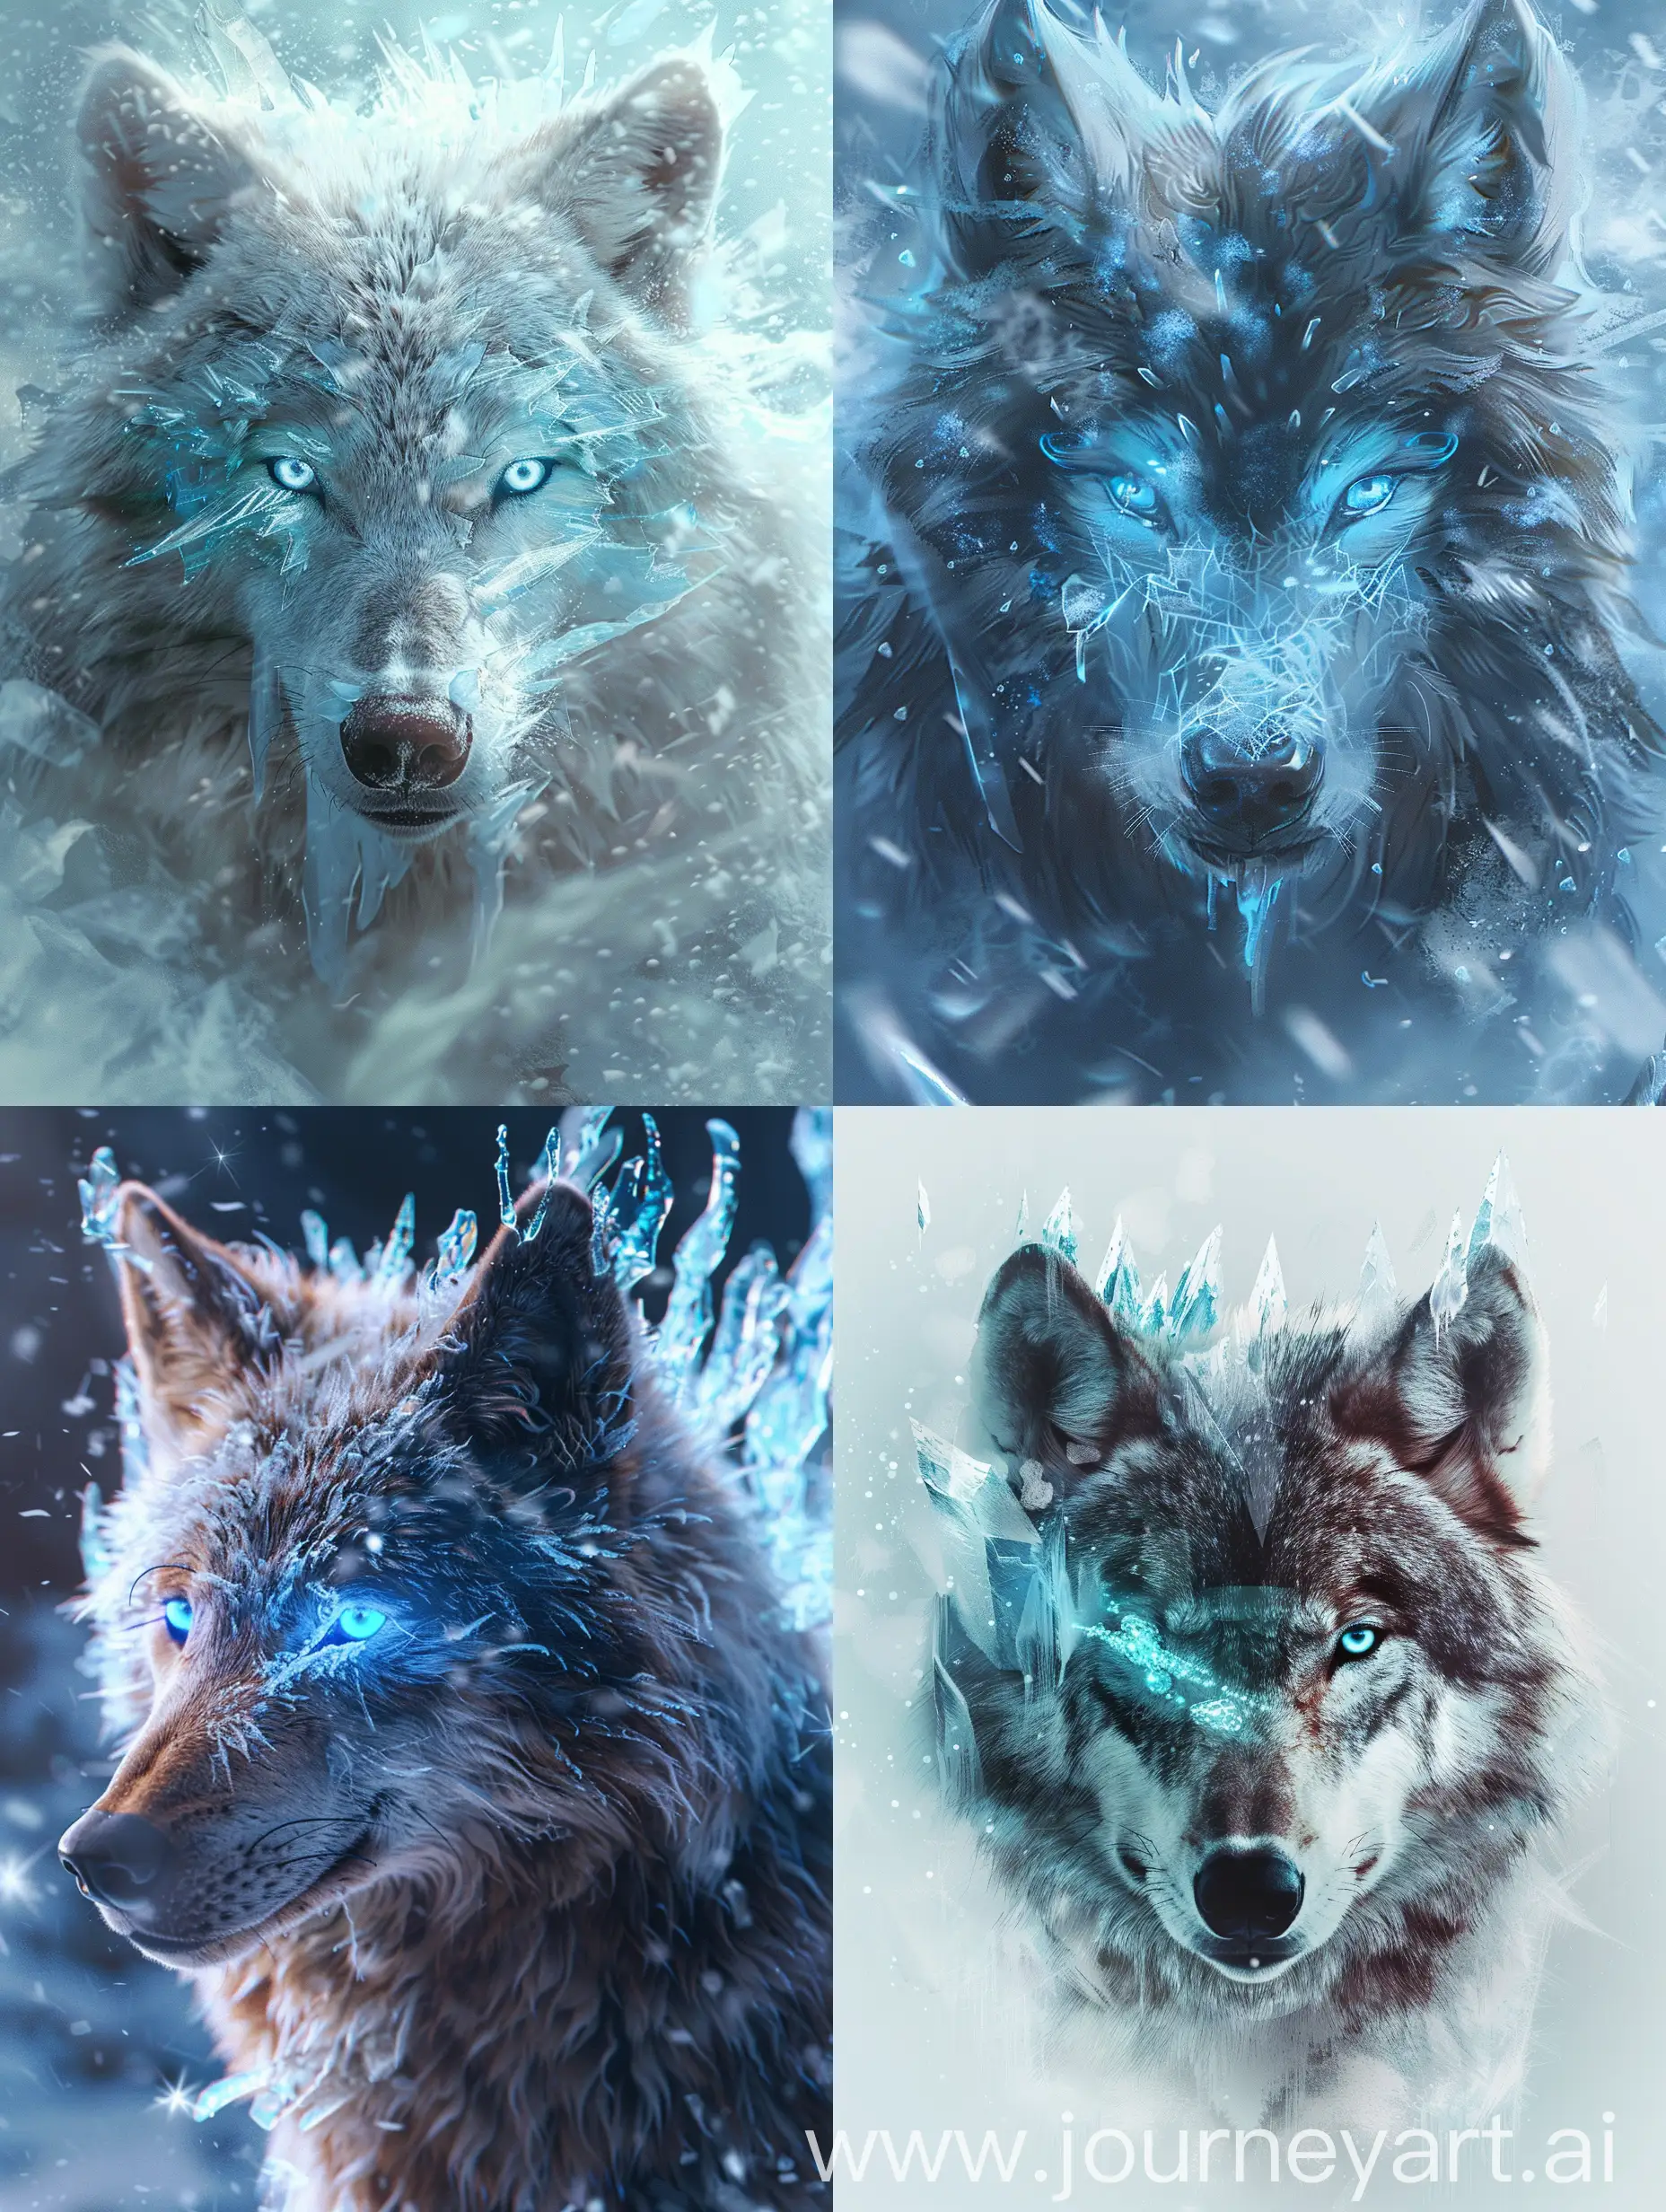 Majestic-Ice-Wolf-with-Blue-Eyes-Frozen-Fantasy-Creature-Art